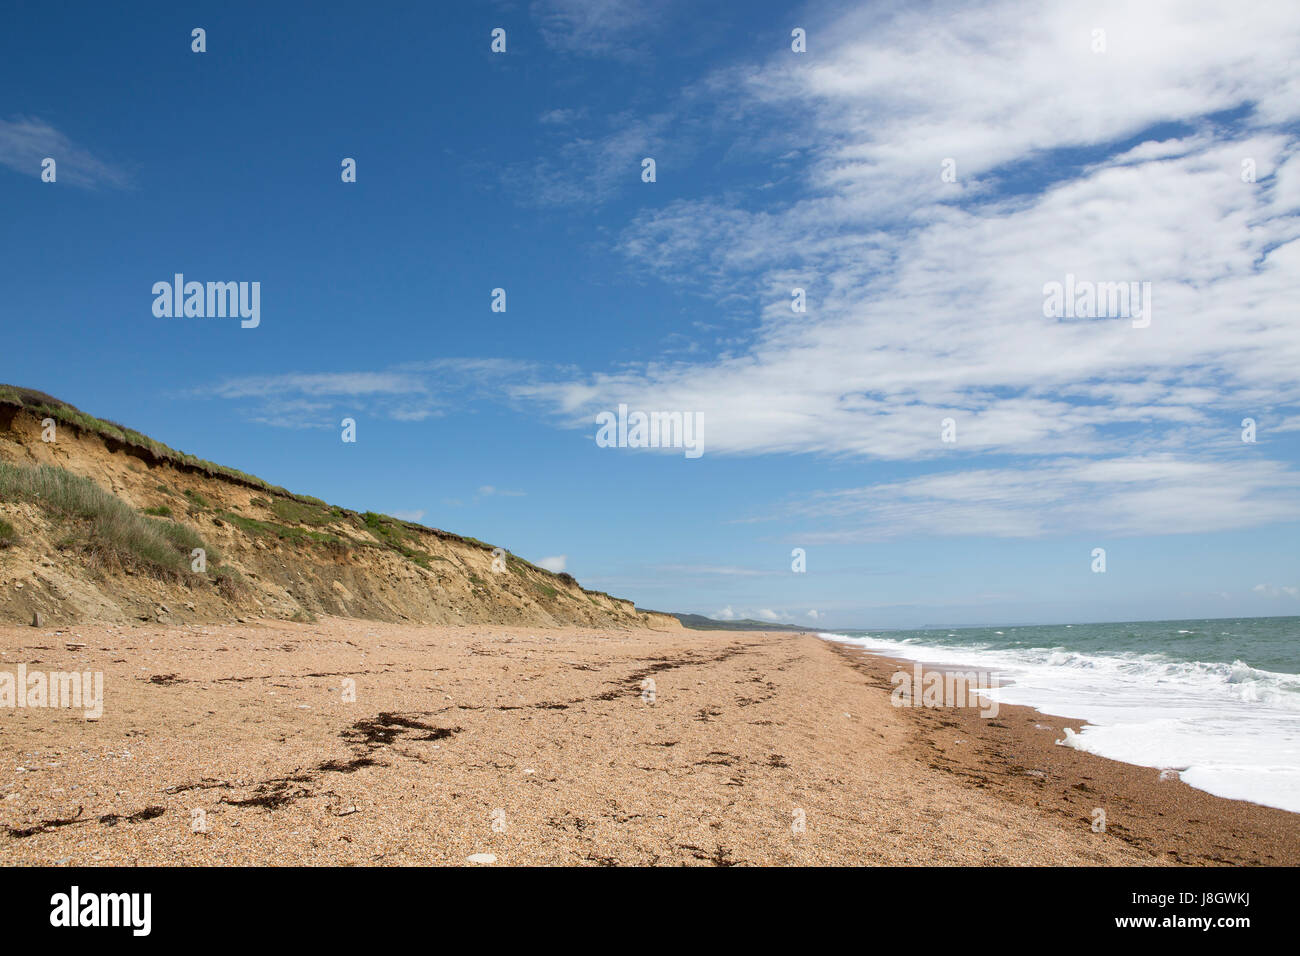 Beach view of the Jurassic coast of Dorset on the South coast of England. Stock Photo